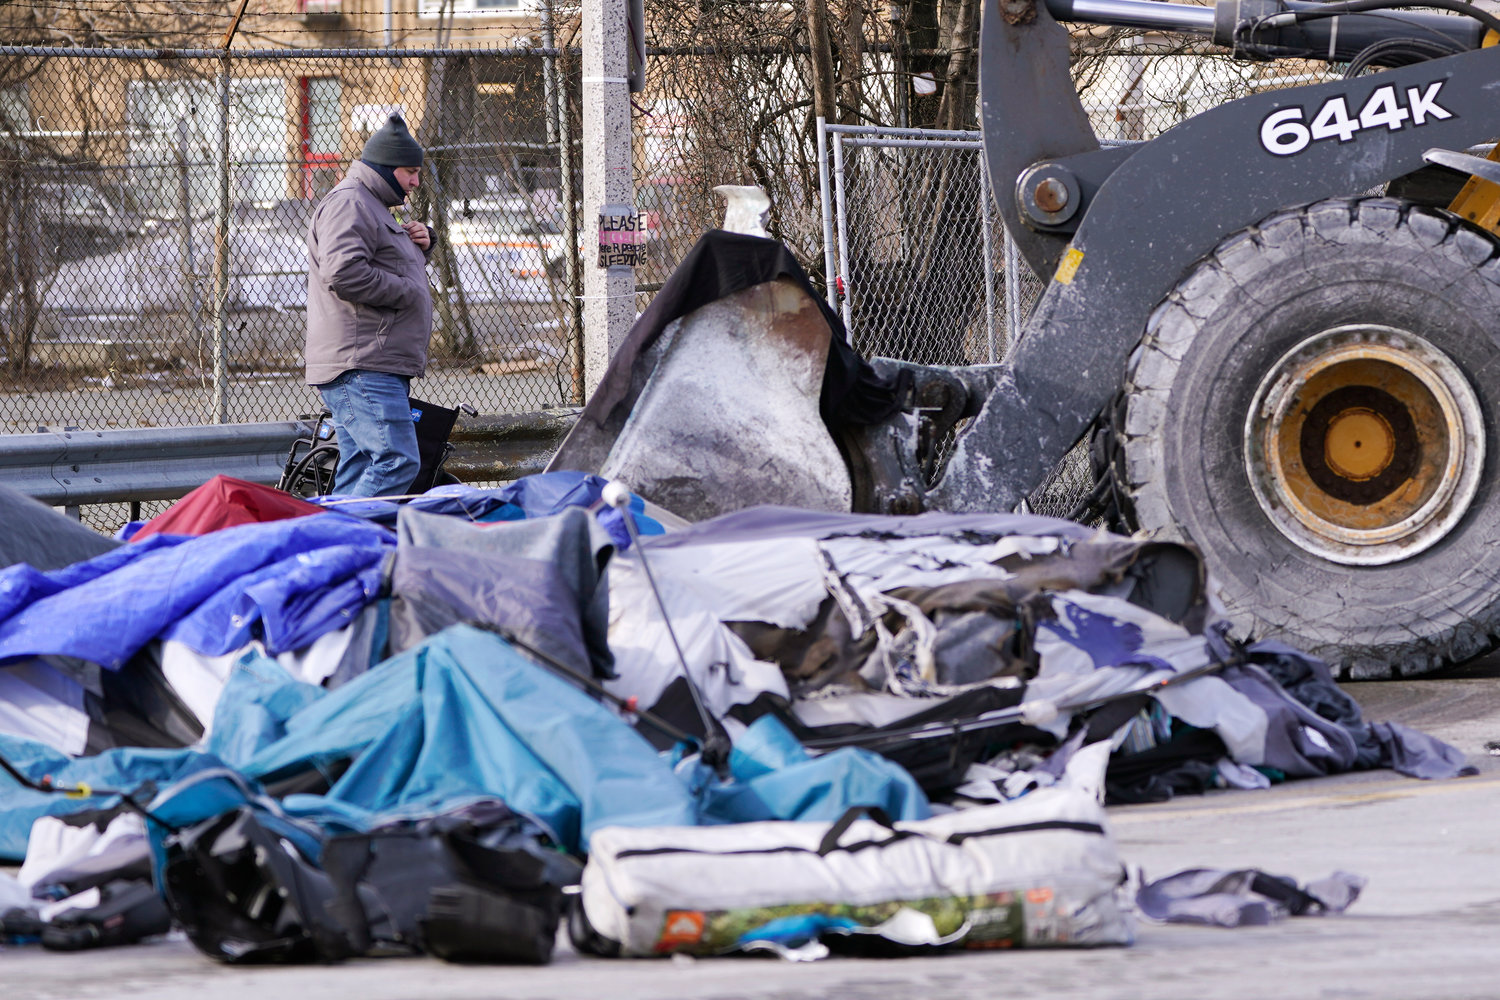 CLEANING UP — A City of Boston worker watches as a front-end loader scoops up tents, furniture and other items as a homeless encampment is cleared from the street Wednesdayin Boston. Boston Mayor Michelle Wu's made good on a self-imposed deadline to move people living in a homeless camp off the streets and into housing.